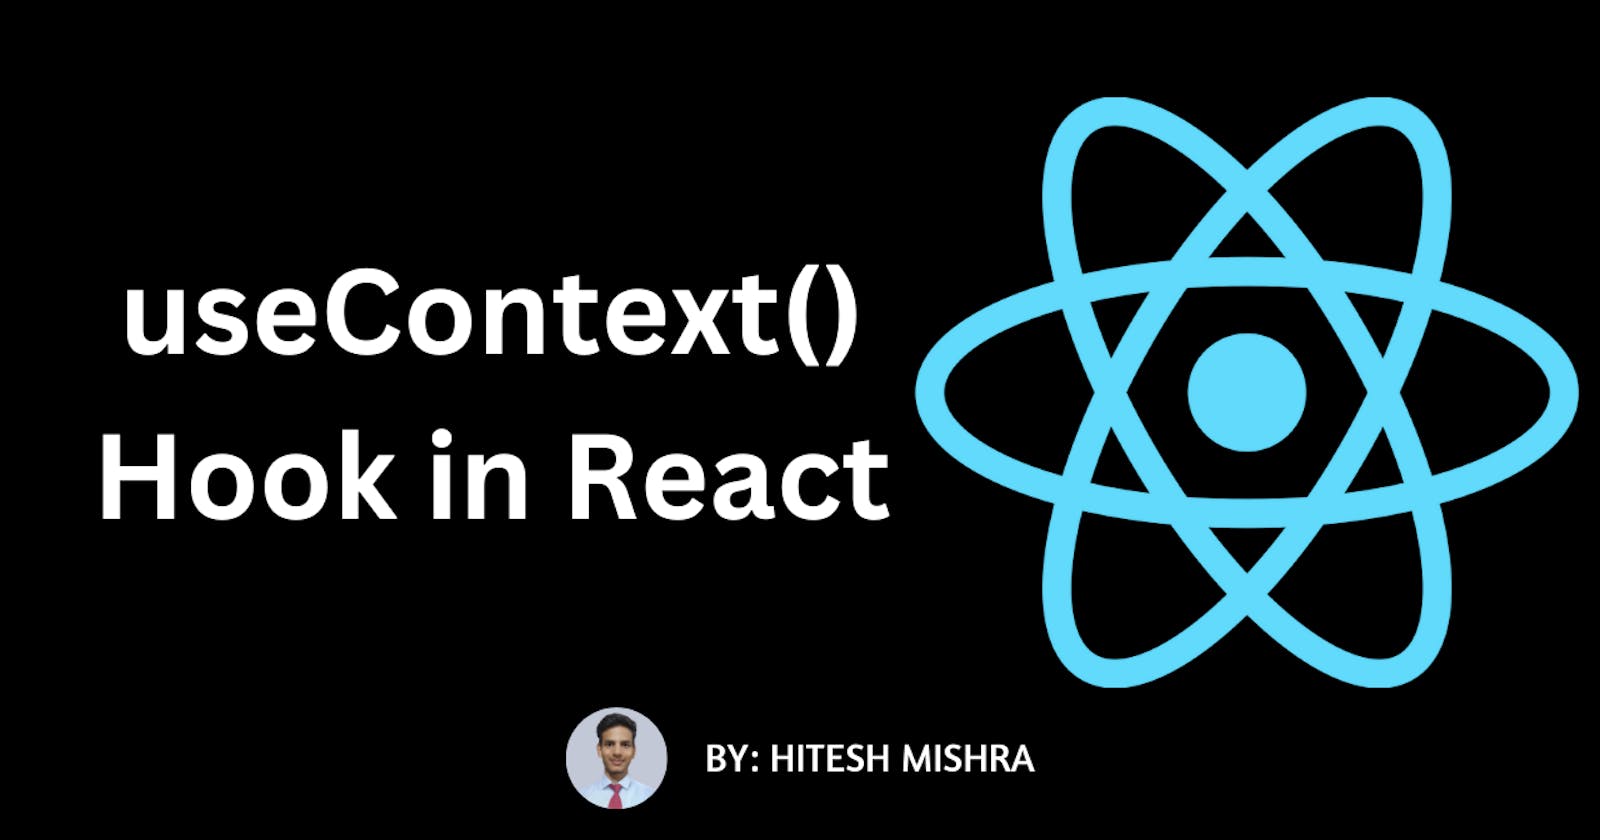 useContext() Hook in React